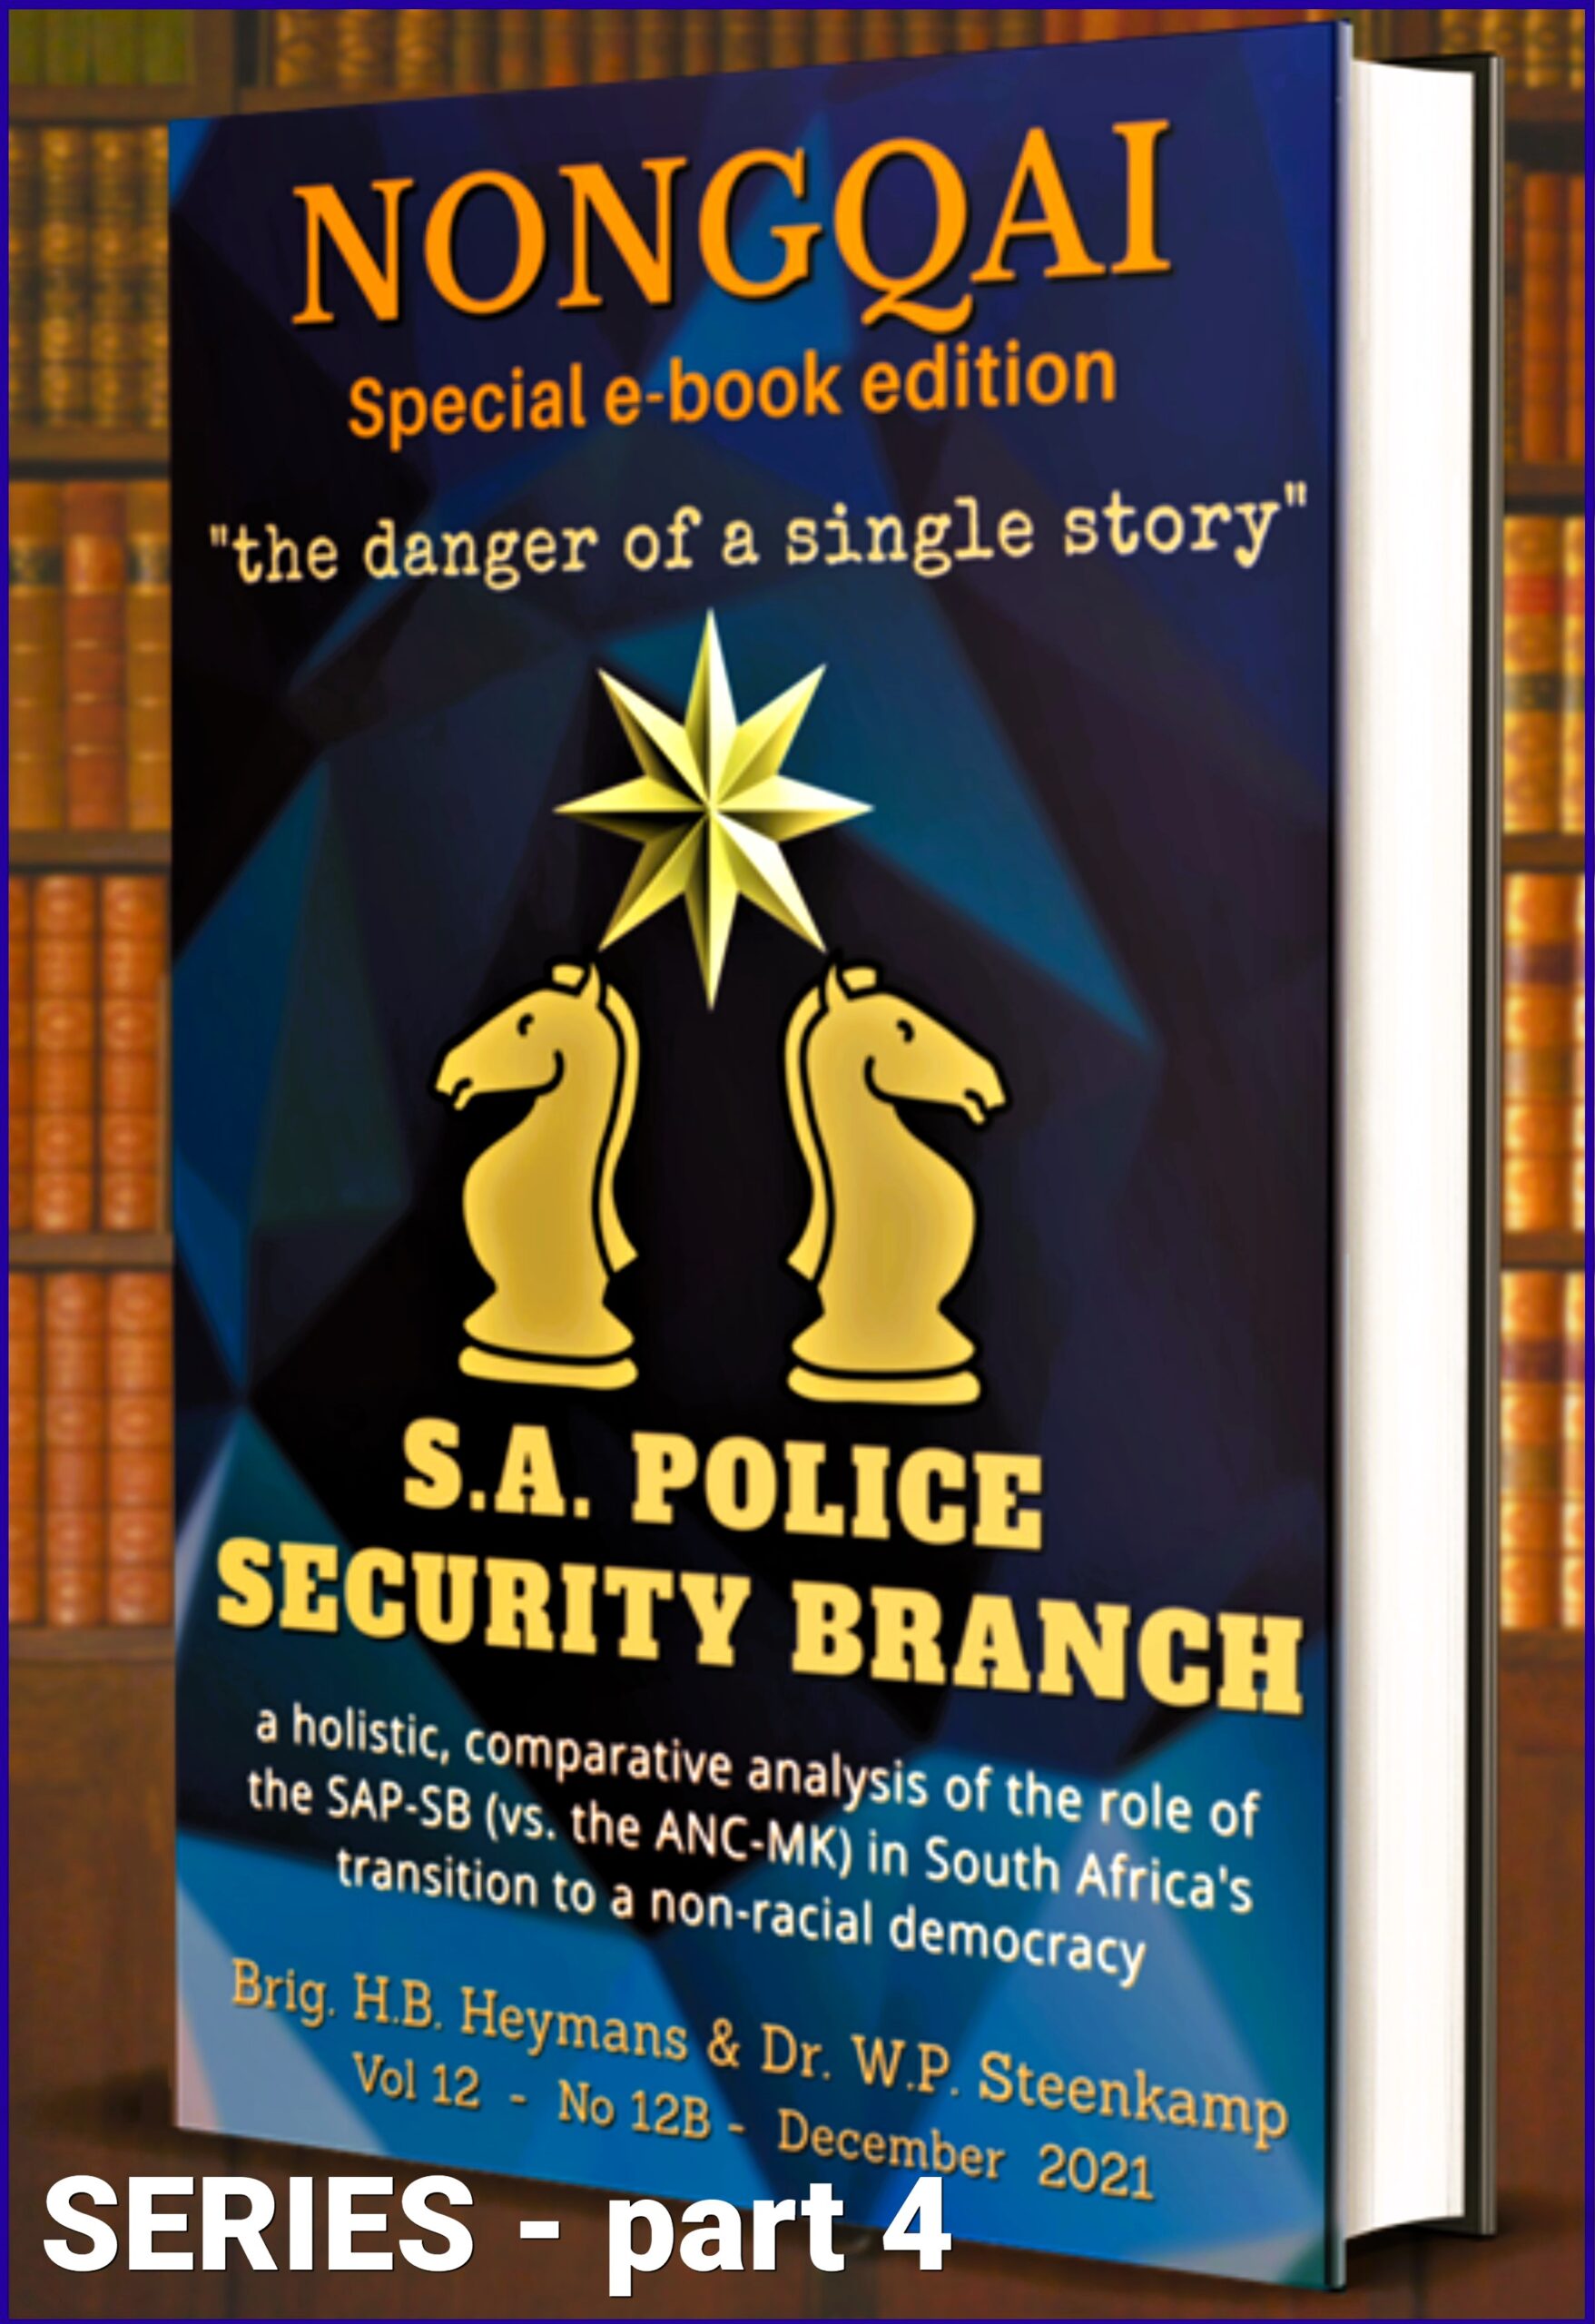 S.A. POLICE SECURITY BRANCH SERIES #4 header